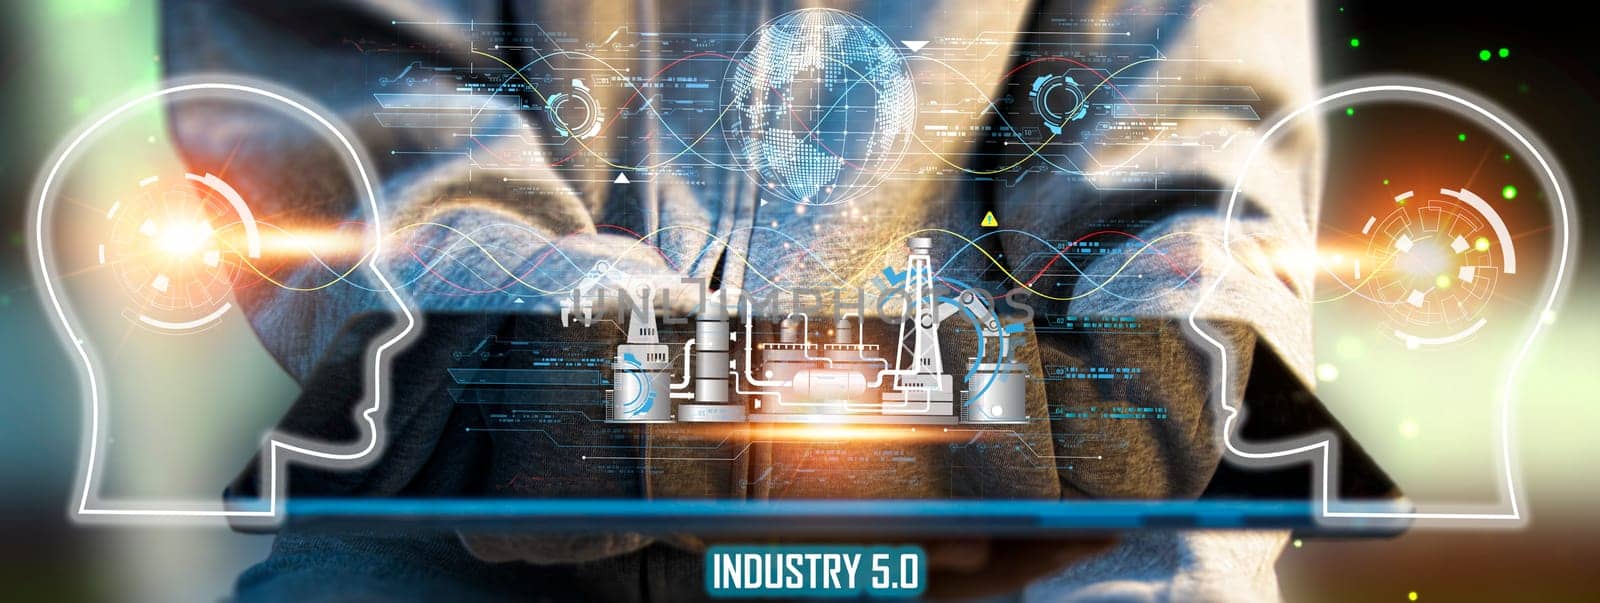 The concept of Industrial Revolution No. 5 is to improve the production process to be more efficient. By working together between humans, intelligent systems AI and robots